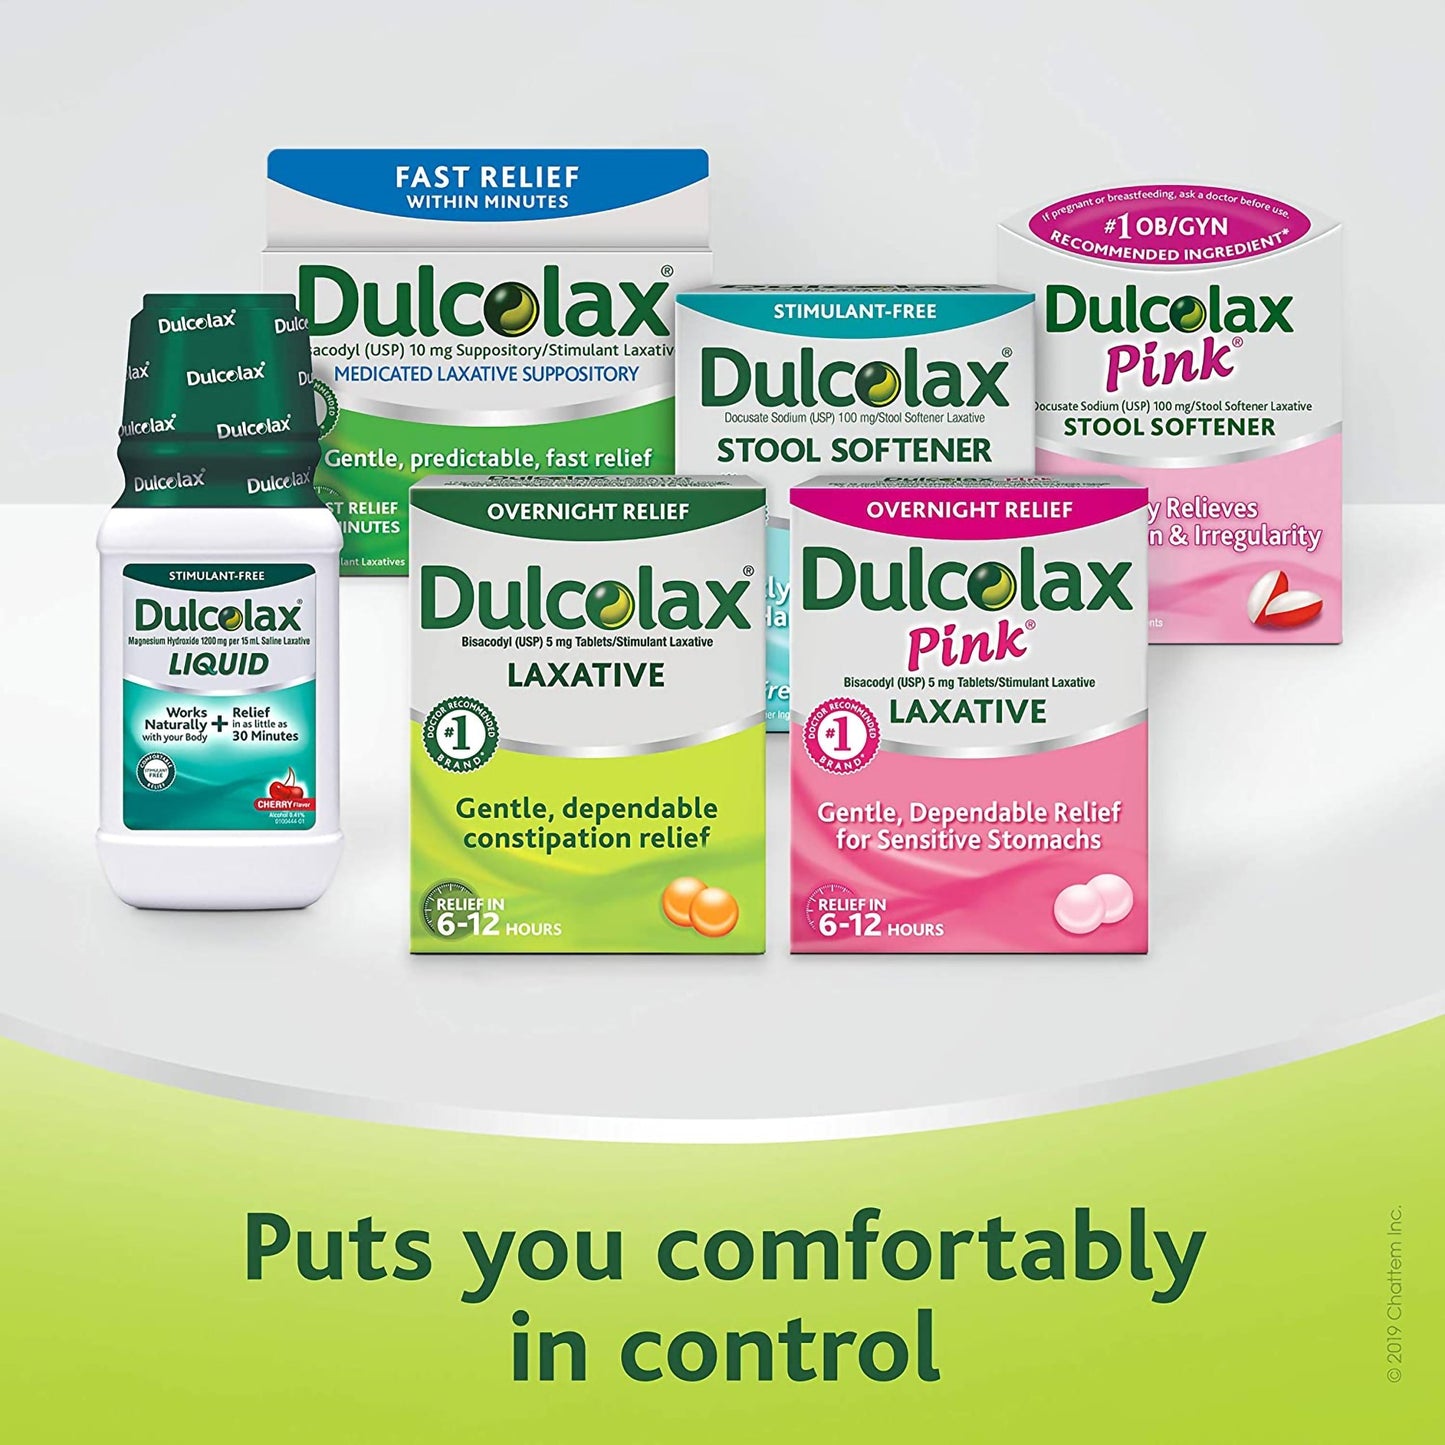 Dulcolax® Laxative Tablets for Overnight Relief, 100 ct